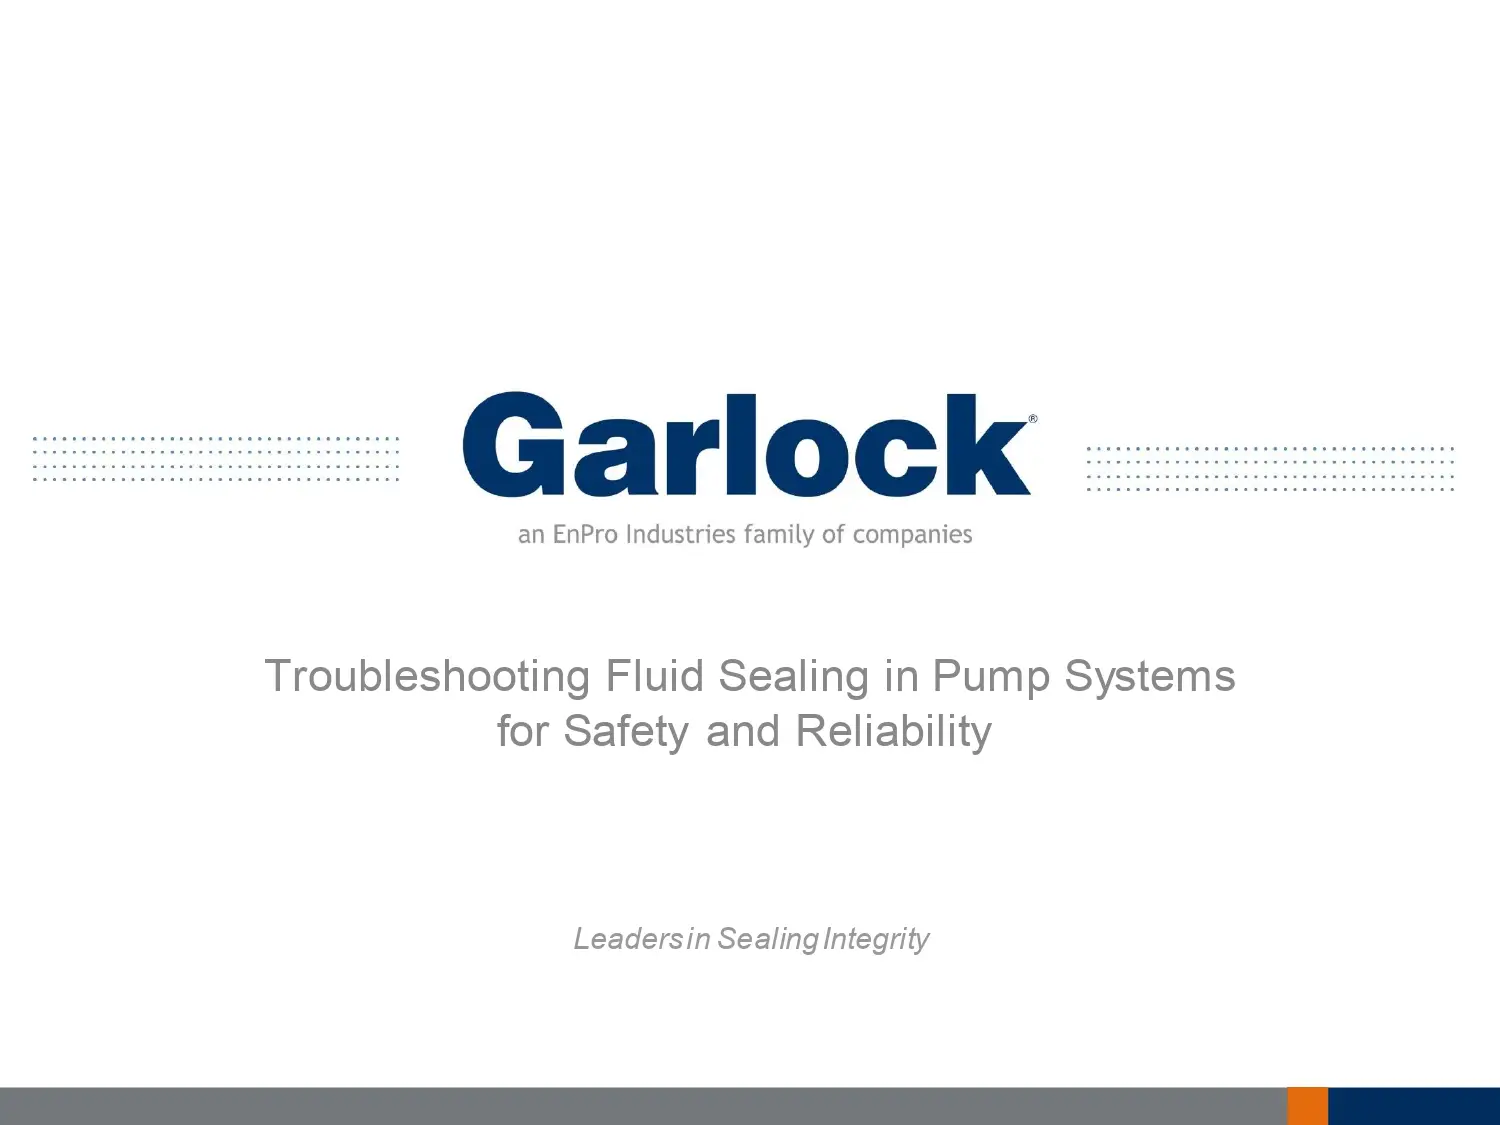 Troubleshooting Fluid Sealing in Pump Systems for Safety and Reliability